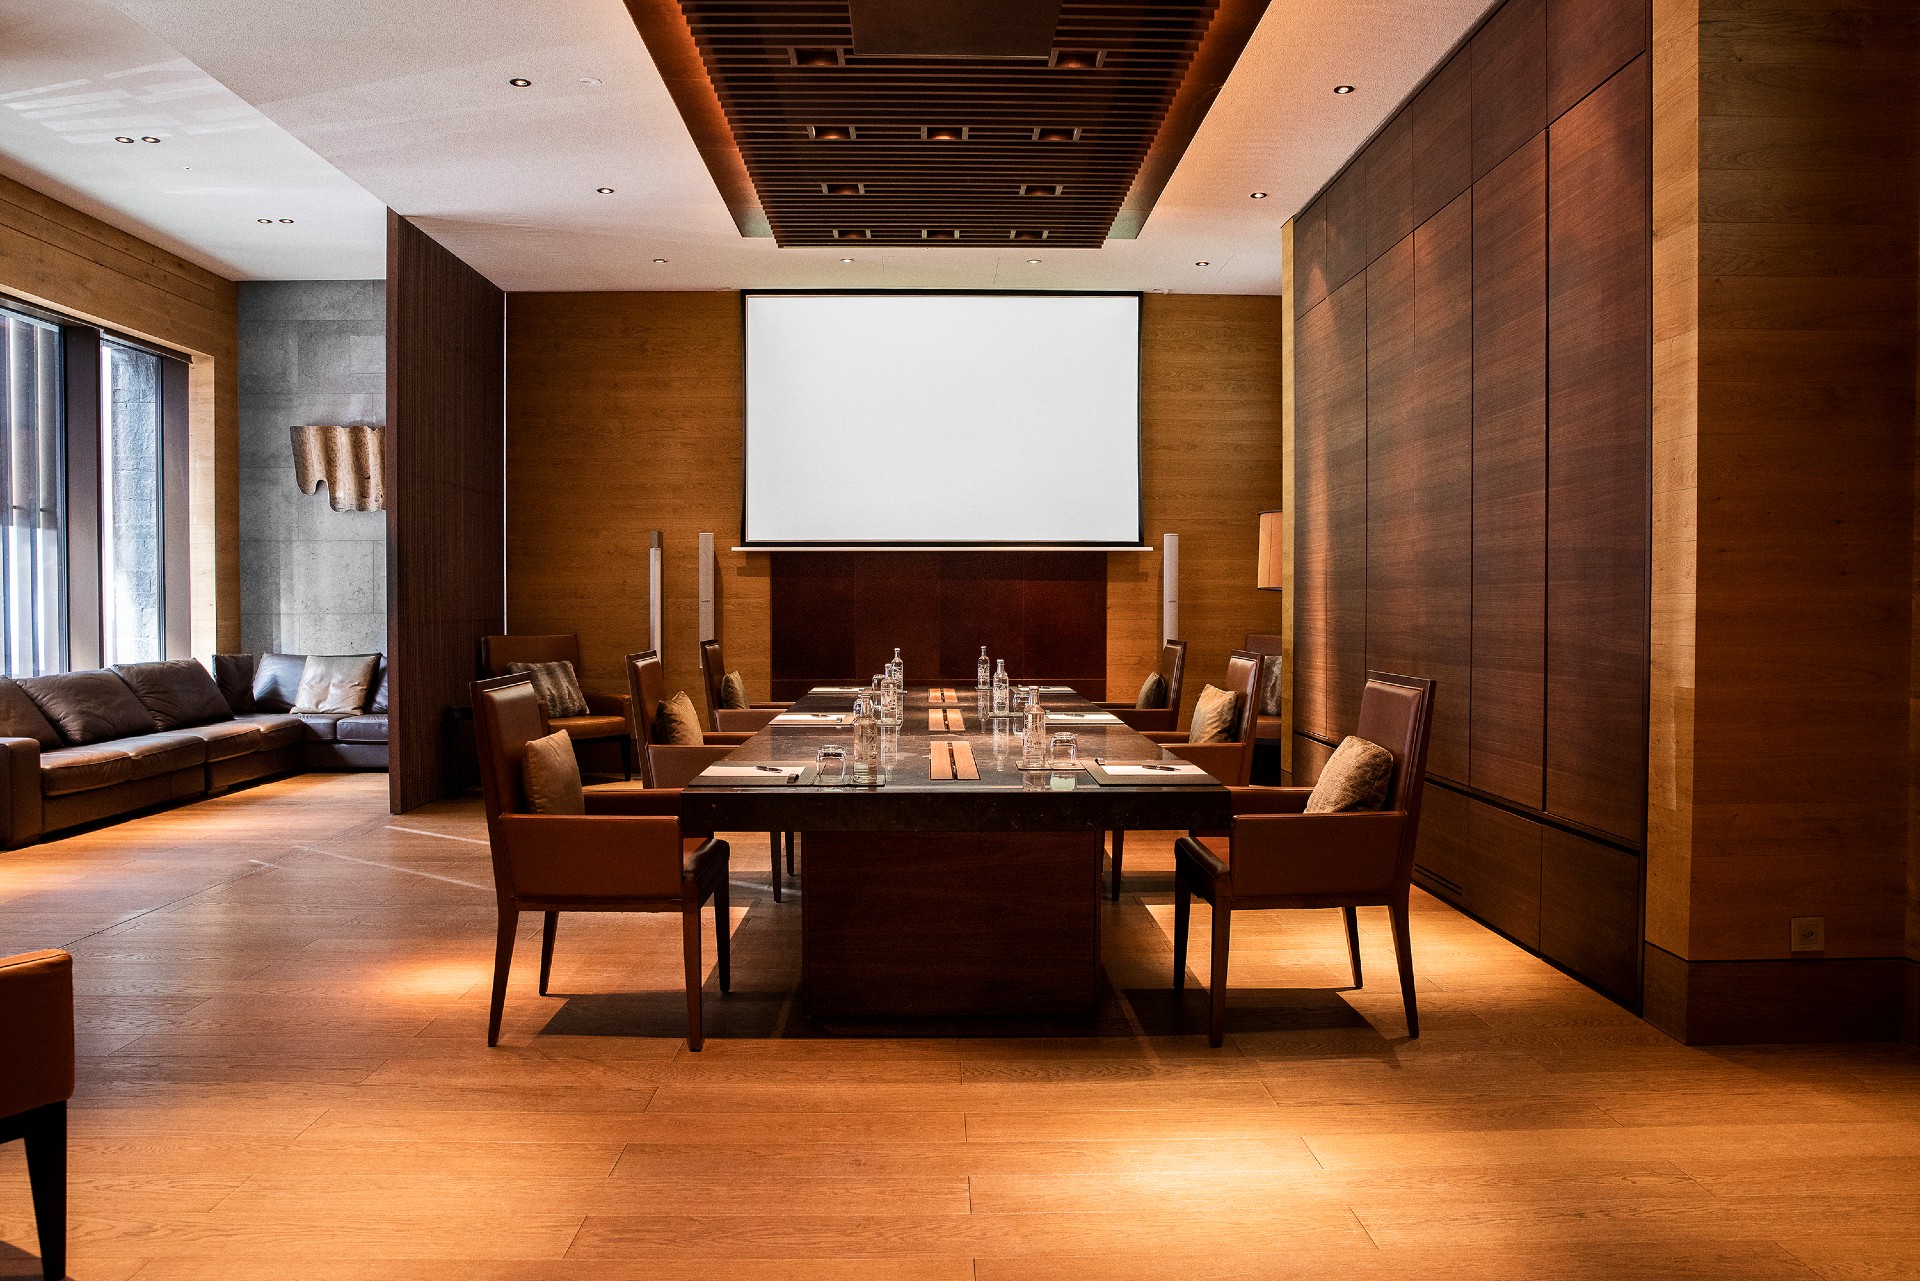 Meeting room at The Chedi Andermatt. Central the marble table on the left side a couch for a cozy break at the large windows.